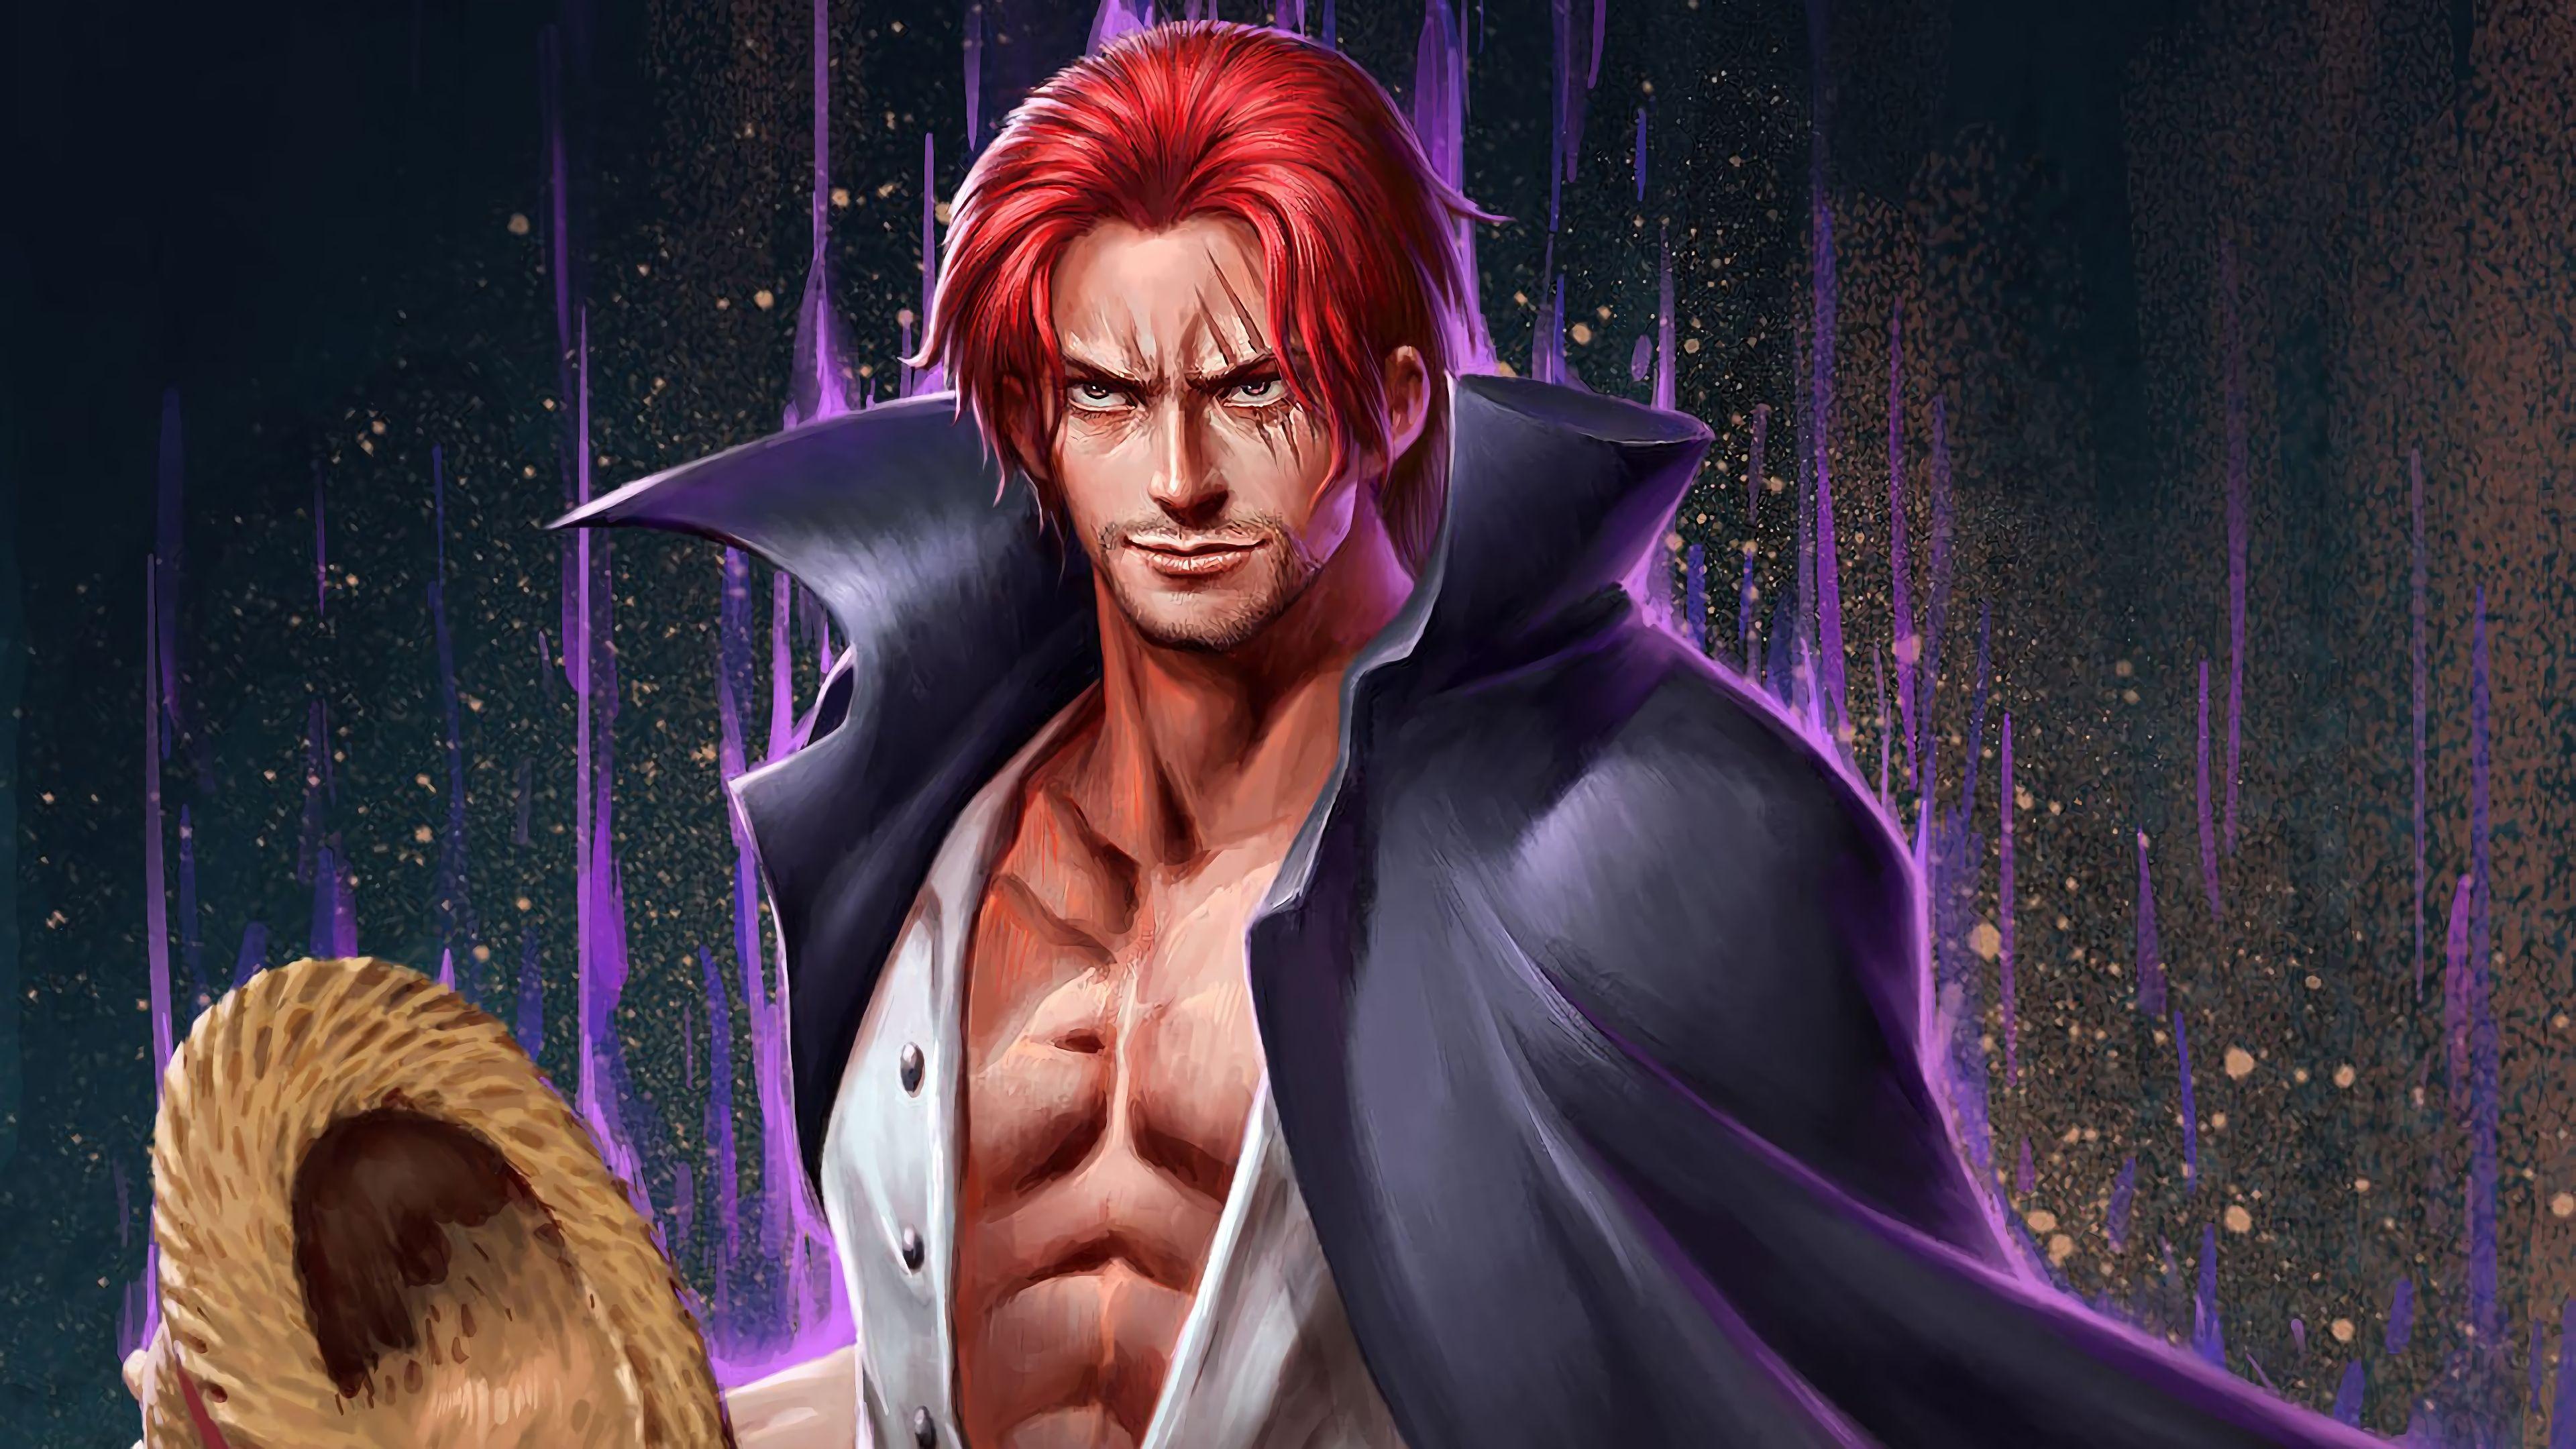 Shanks One Piece, HD Anime, 4k Wallpapers, Image, Backgrounds.